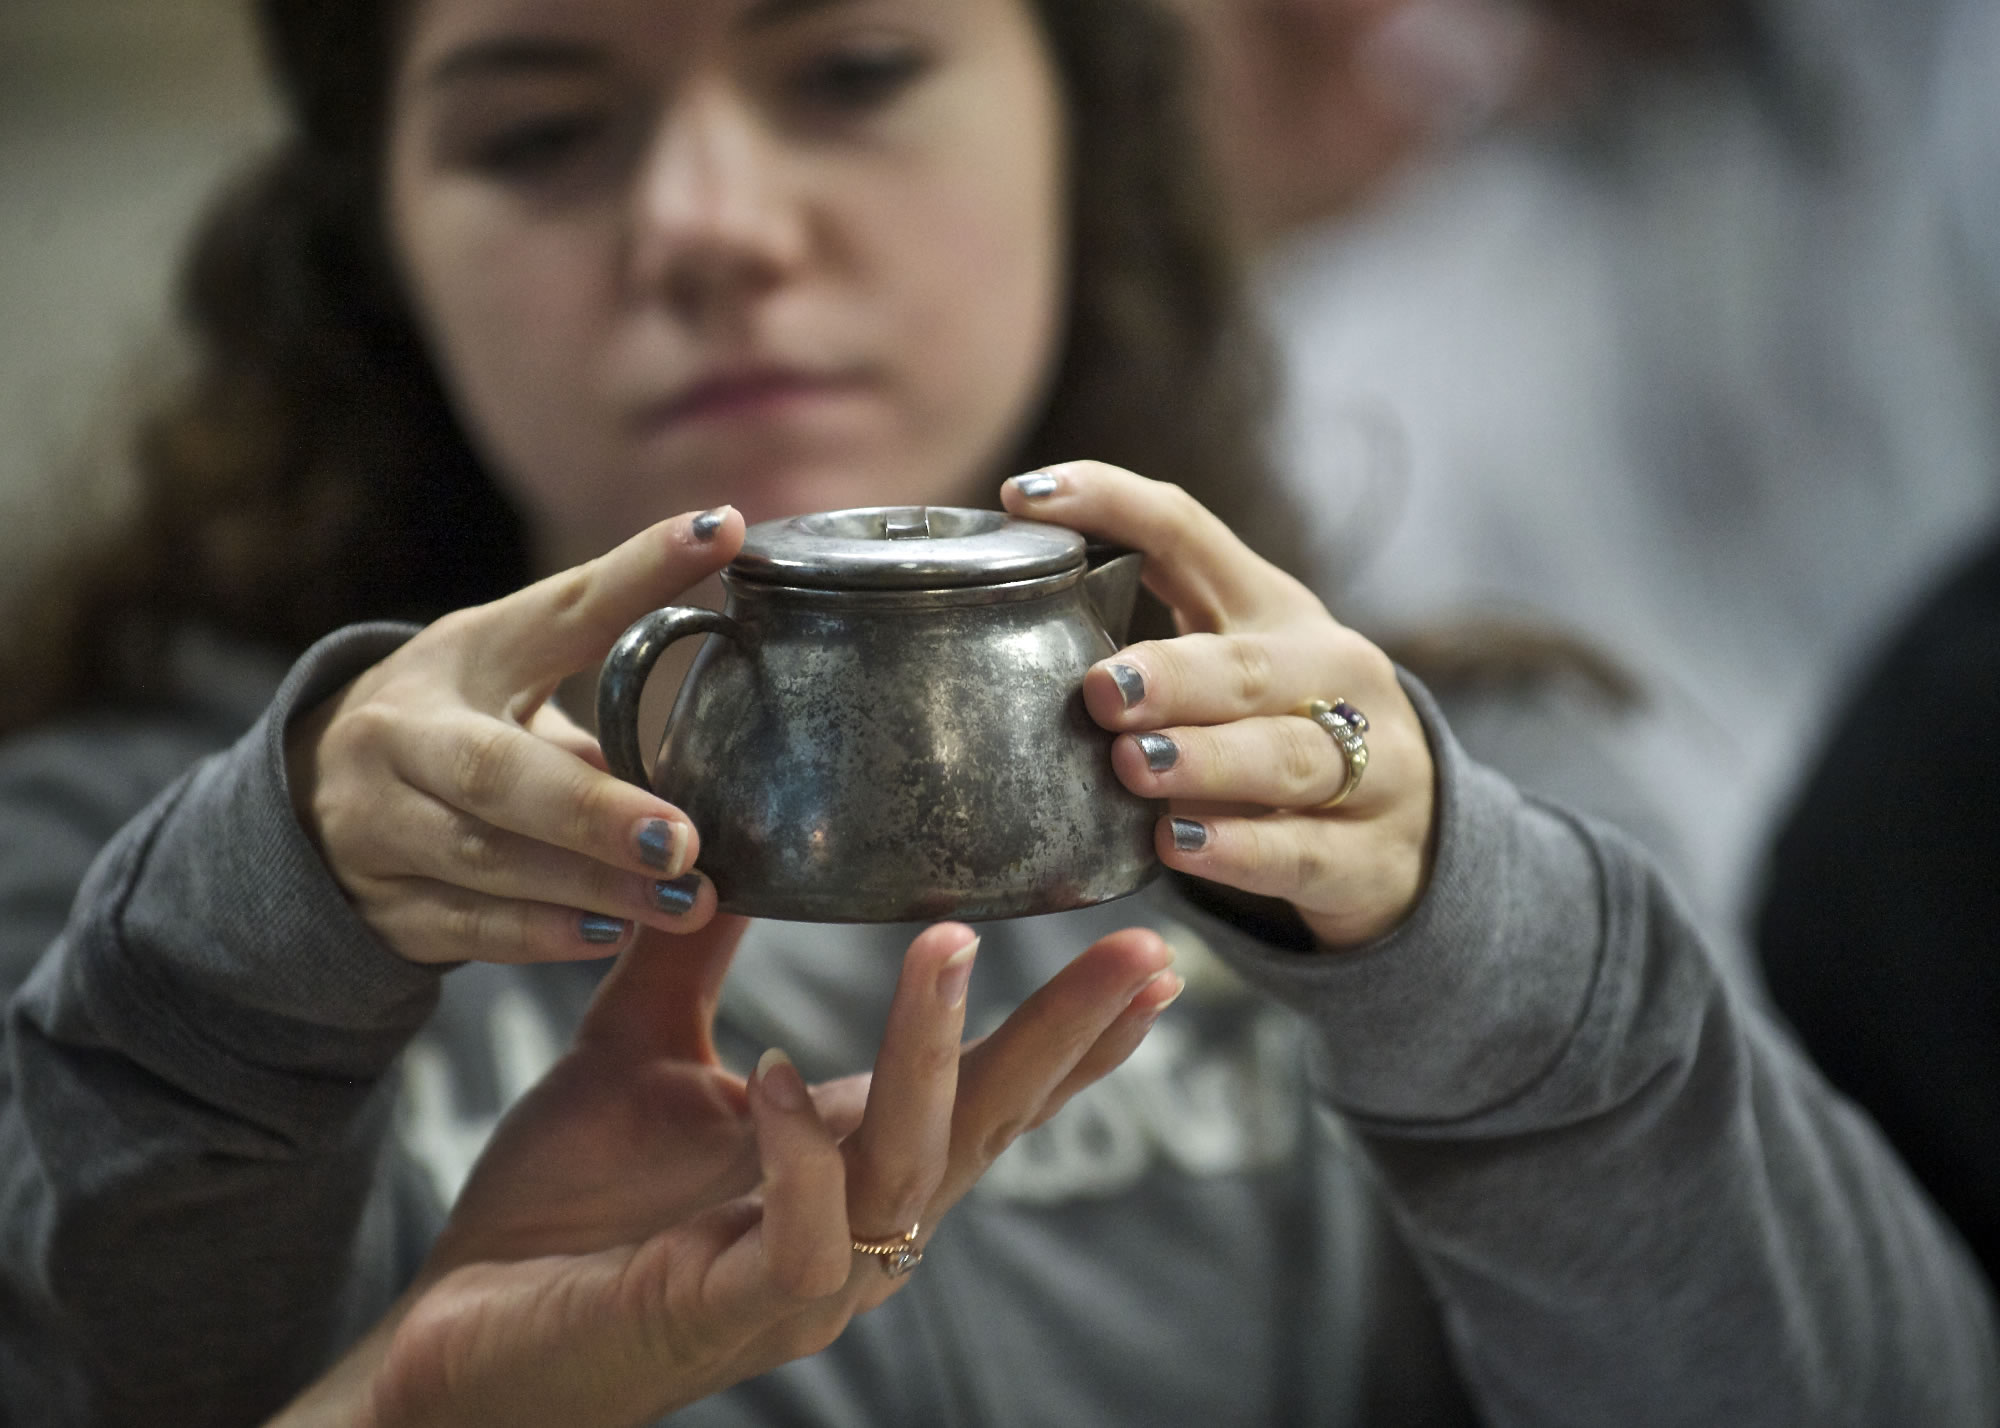 Heritage High School student Darlina Rose, 16, examines a 70-year-old creamer that contained a World War II-era telegram announcing the death of fighter pilot 2nd Lt.